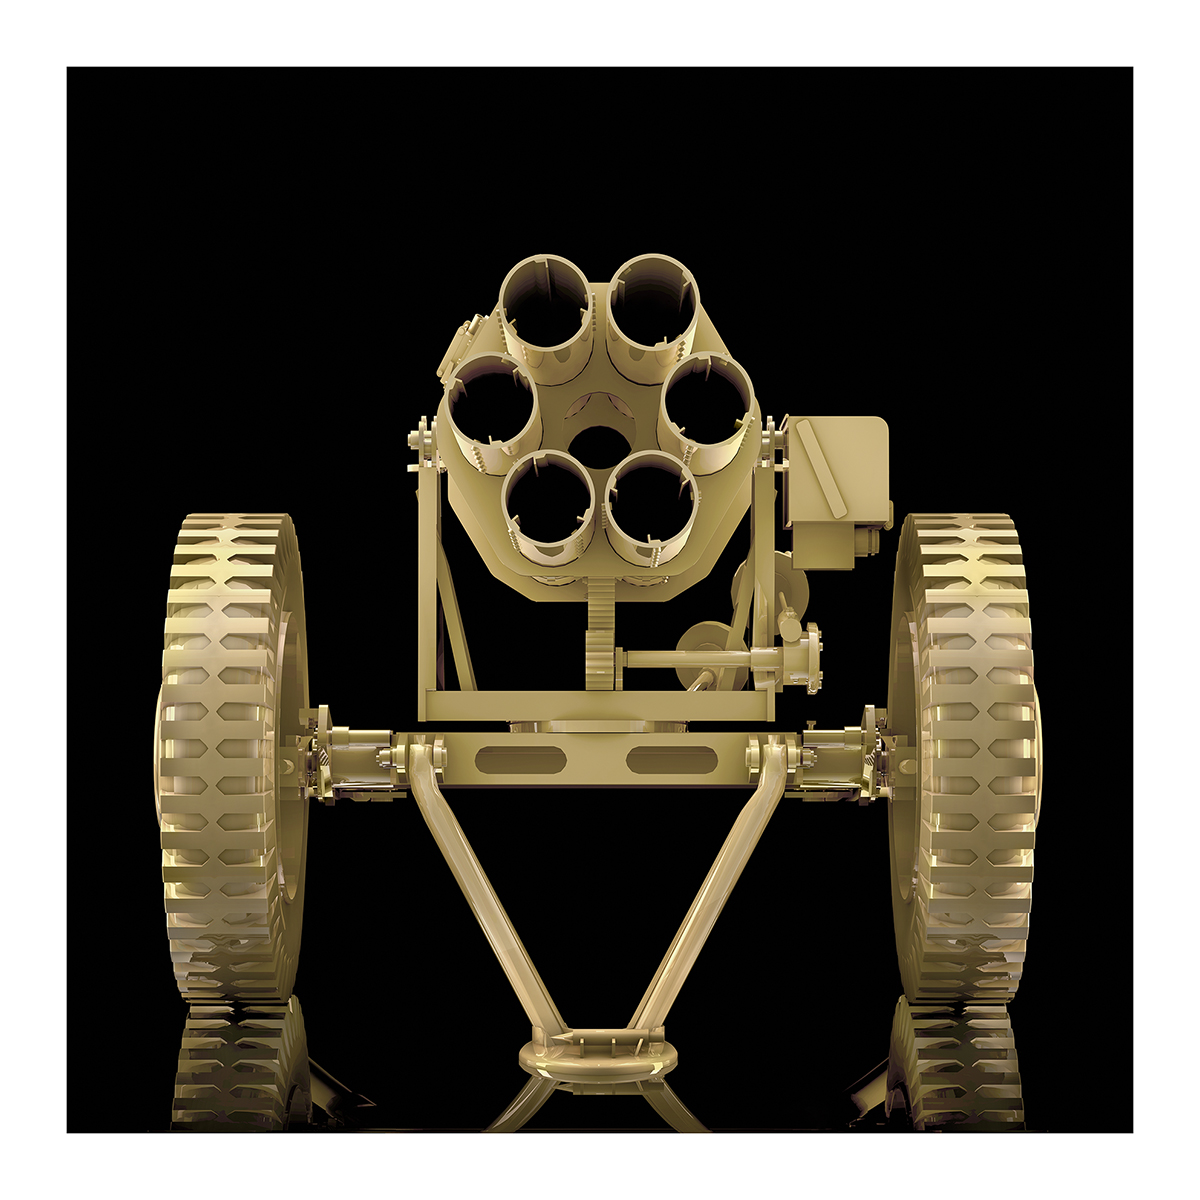 2012 002 Gold Century Heavy Weapons 002 - 2012 - Gold Century. Heavy Weapons